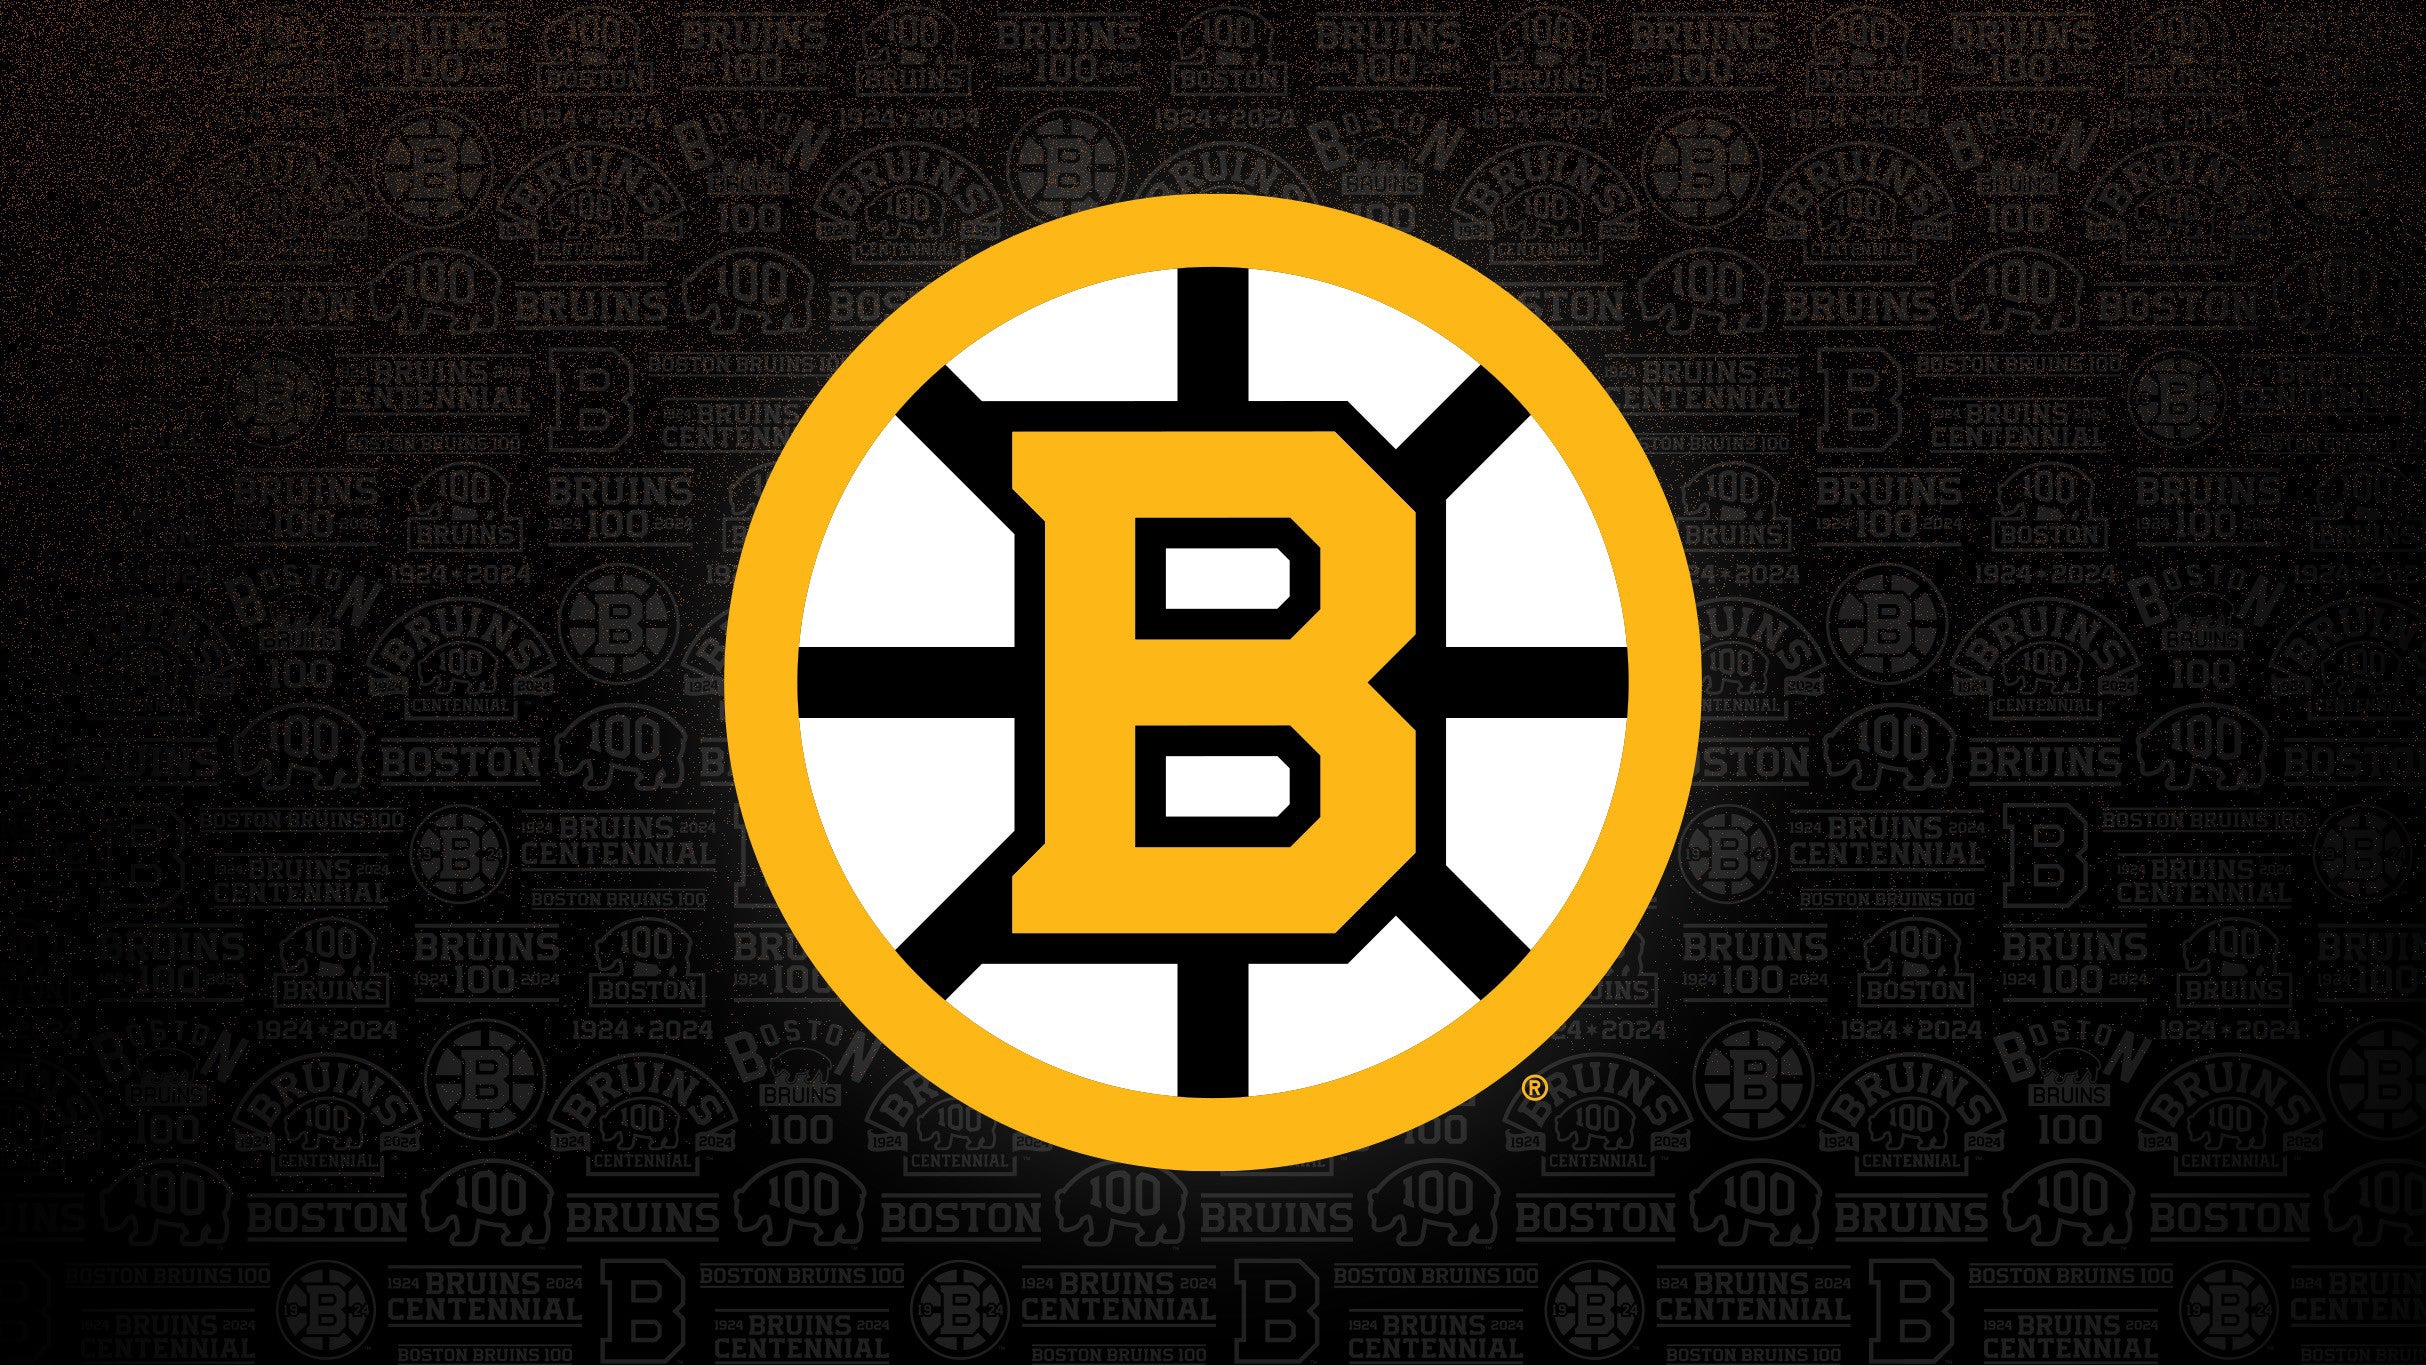 Second Round: Panthers at Bruins Rd 2 Hm Gm 3